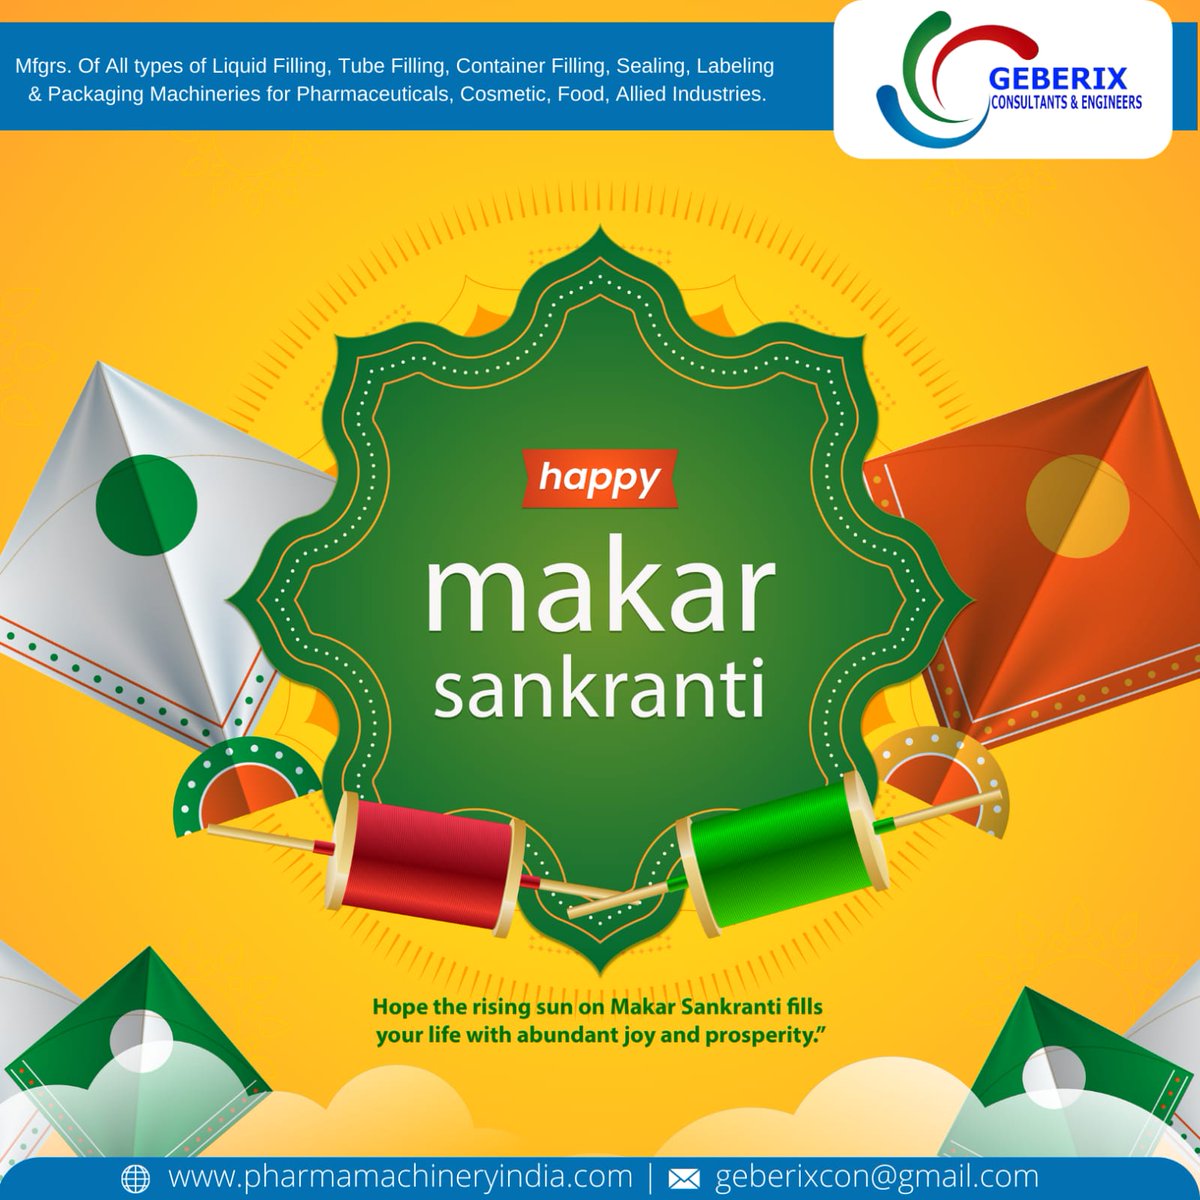 Happy makar Sankranti to all
Wishing you and your family lots of happiness and sweet wishes
#geberix #makarsankranti #happiness #sweetwishes